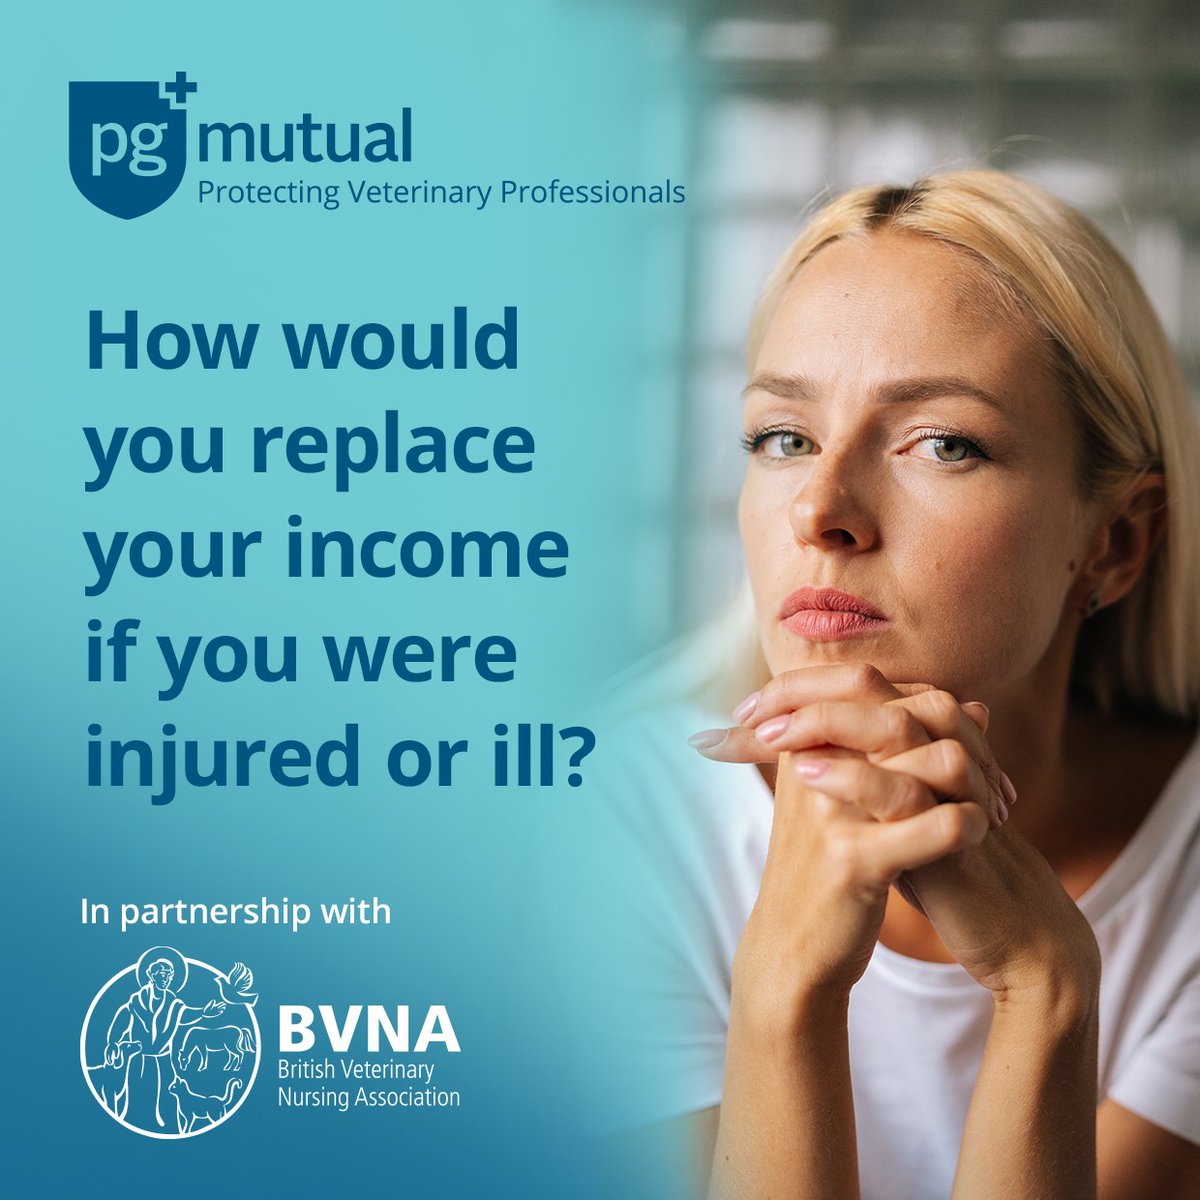 Did you know, a record 1 in 16 people are off work long-term because of sickness* #IncomeProtection Plus from @PGMutual could provide long term cover payable to age 65 or when you’re able to return to work. Get a quote today - bit.ly/3xprxEy (*som.org.uk)